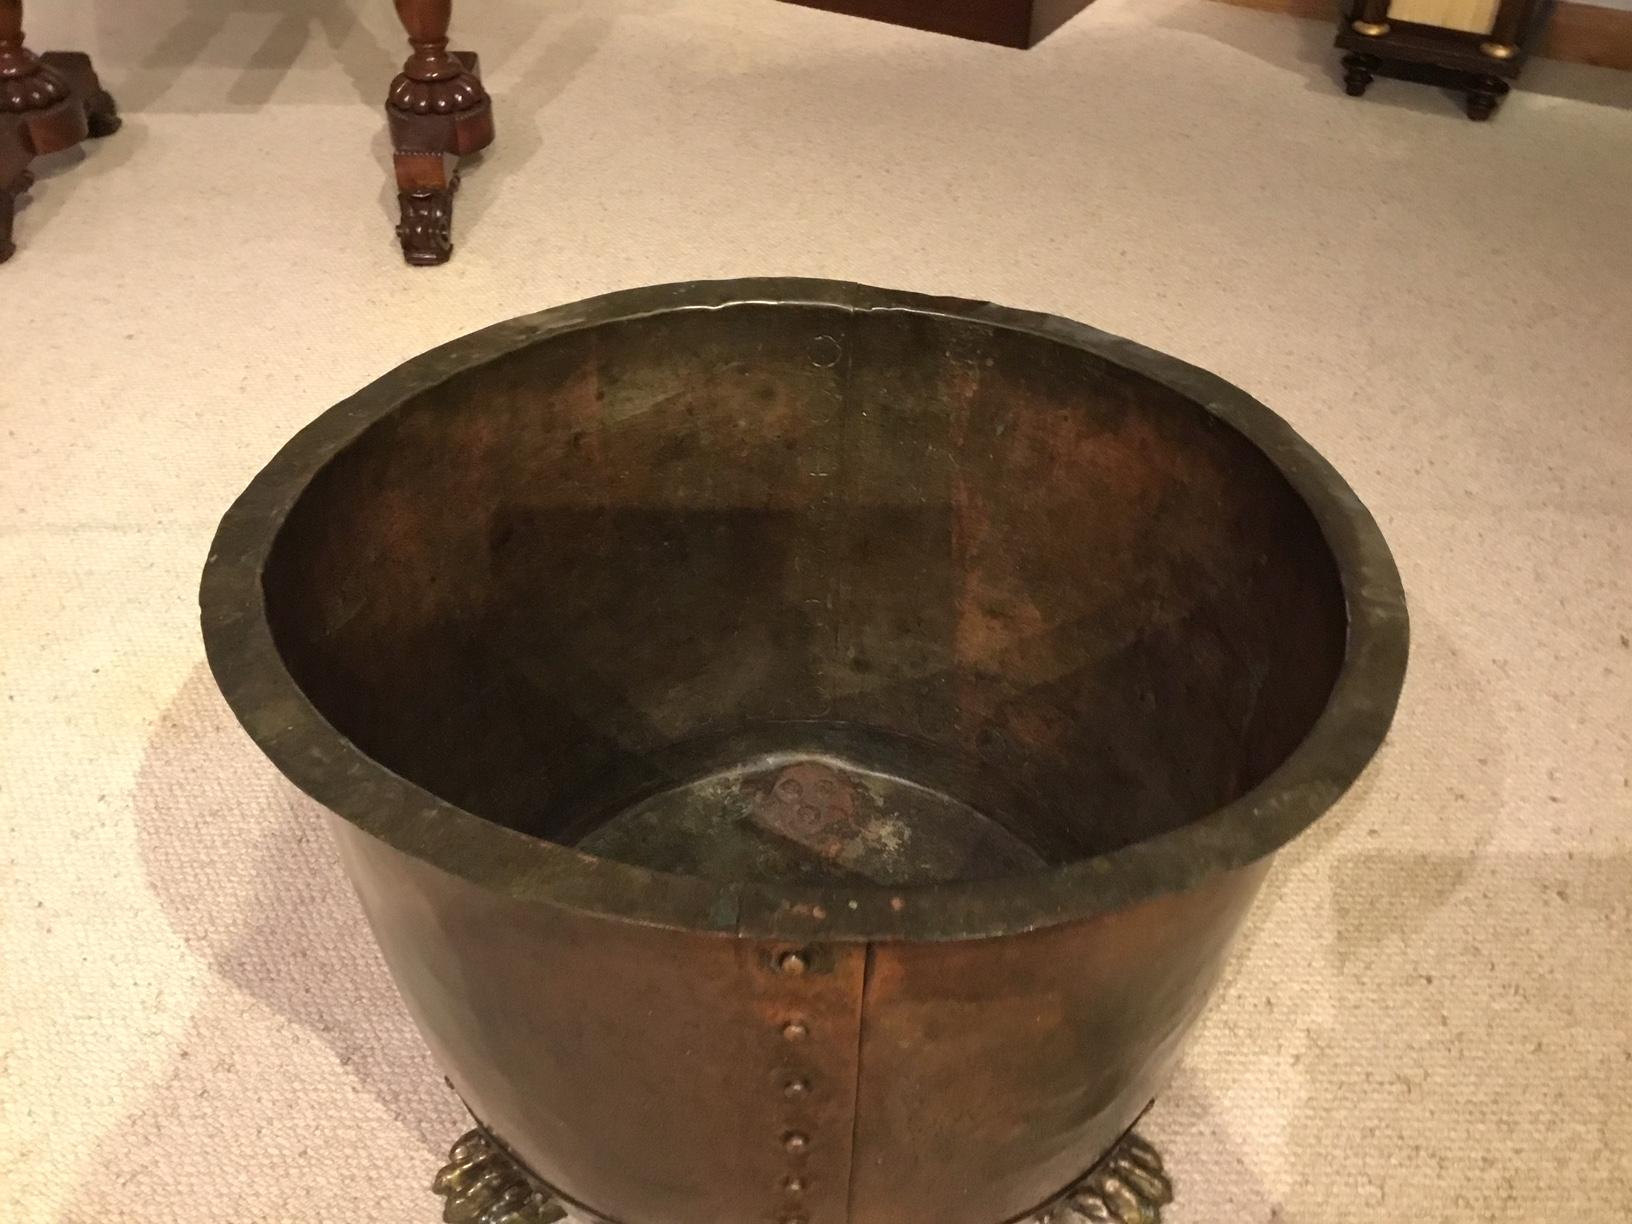 A Good 19th Century patinated copper riveted log bin. Having a circular copper body of wonderful color and patination, showing riveted construction. Supported on three lions paw feet. English, circa 1880

Dimensions: 17.5